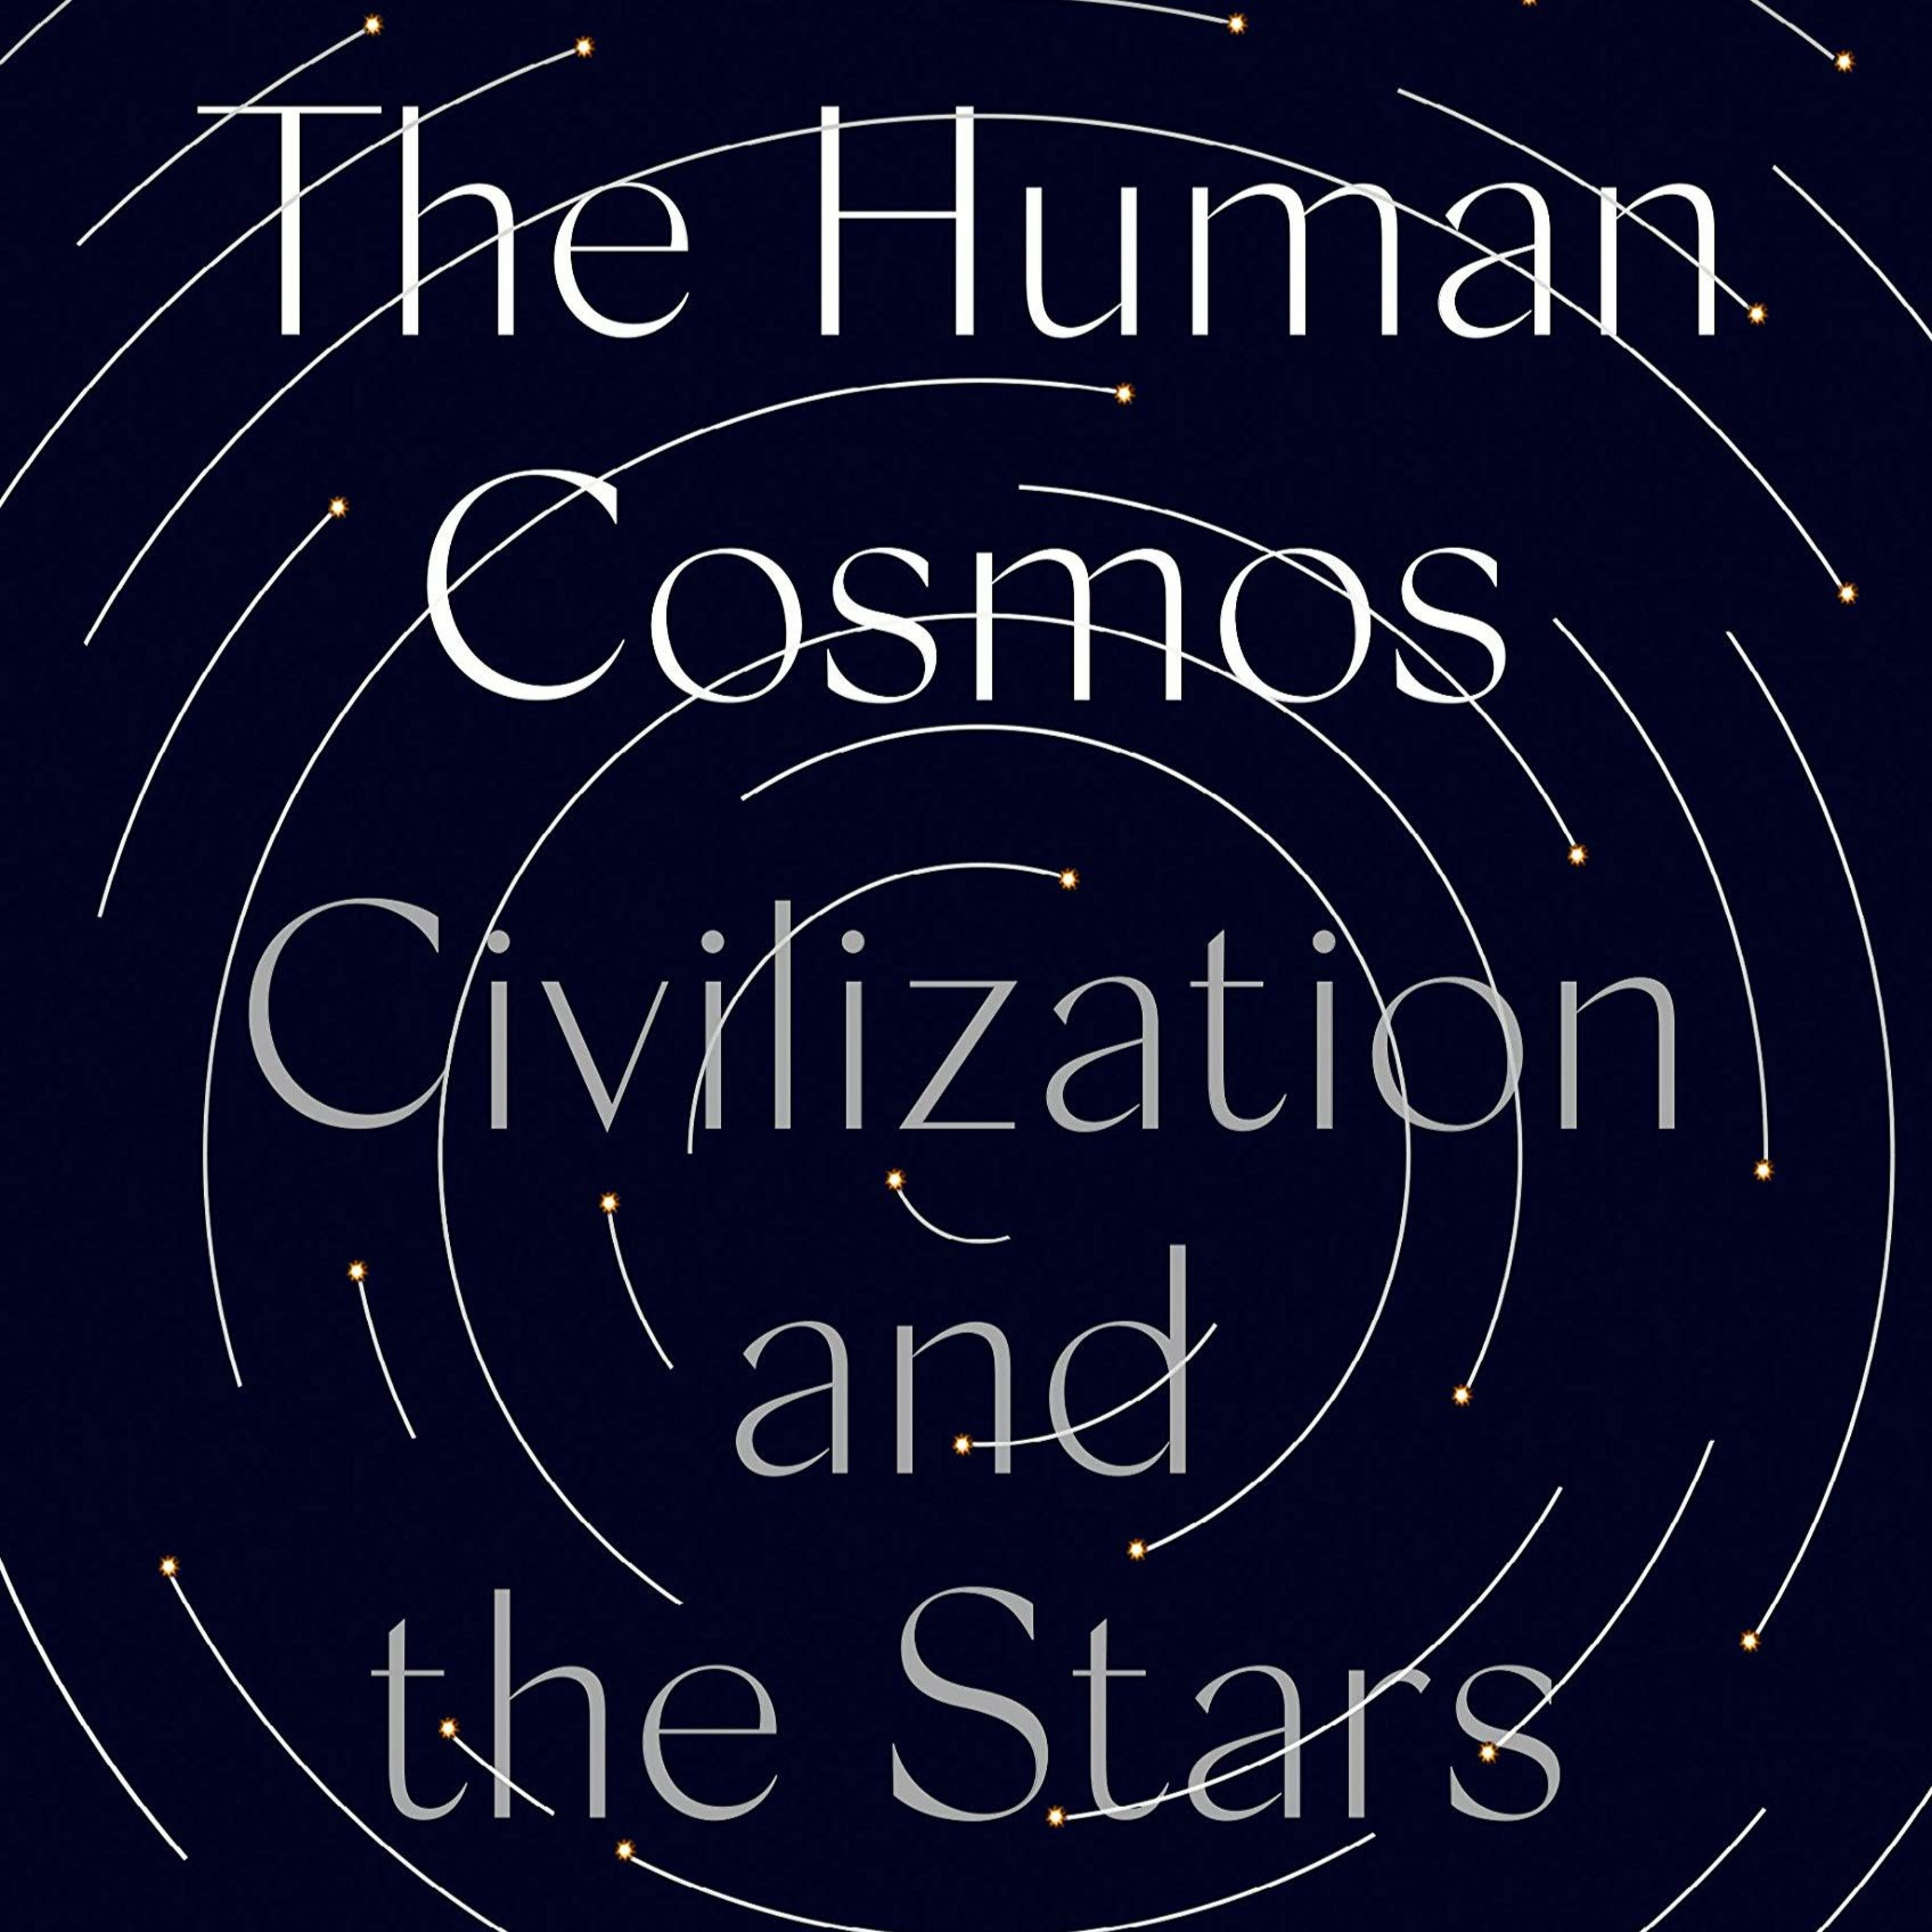 Jo Marchant, ”The Human Cosmos: A Secret History of the Stars”